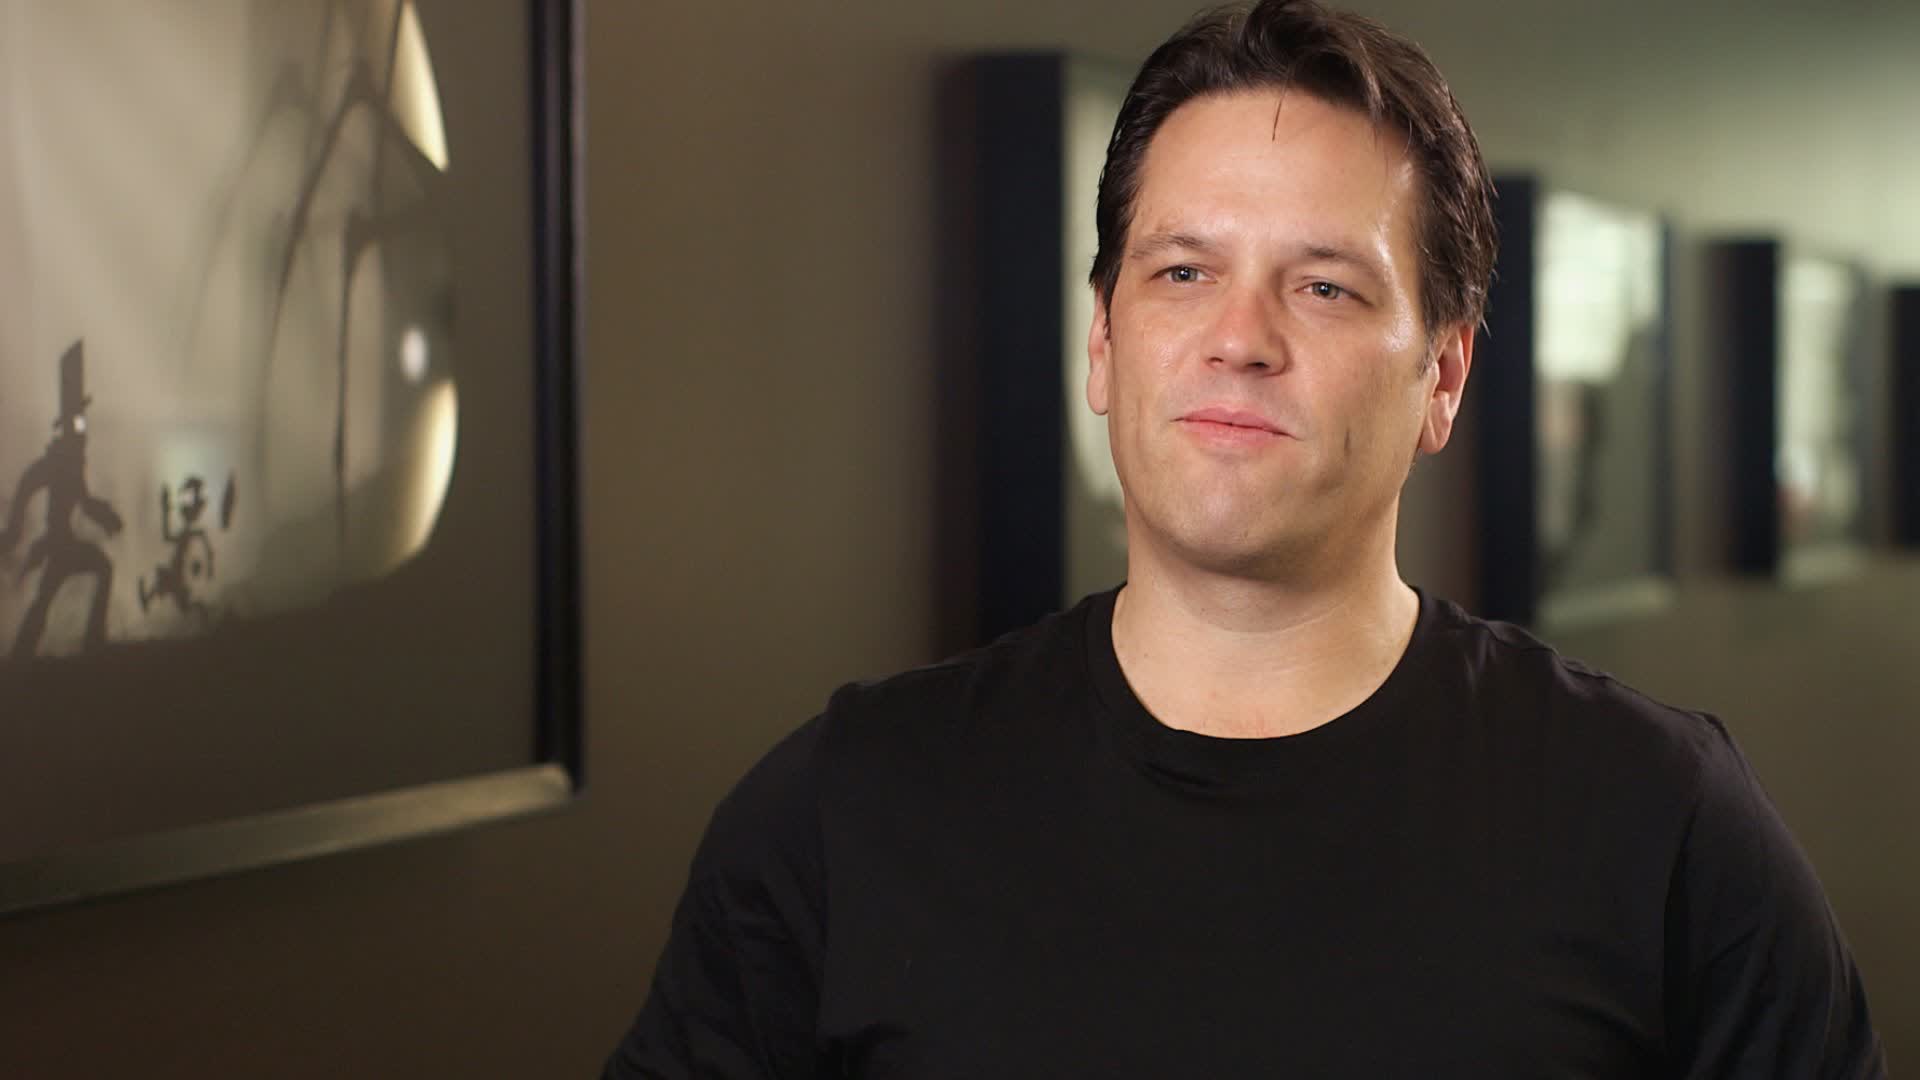 Phil Spencer says Xbox is ‘evaluating all aspects’ of its relationship with Activision Blizzard